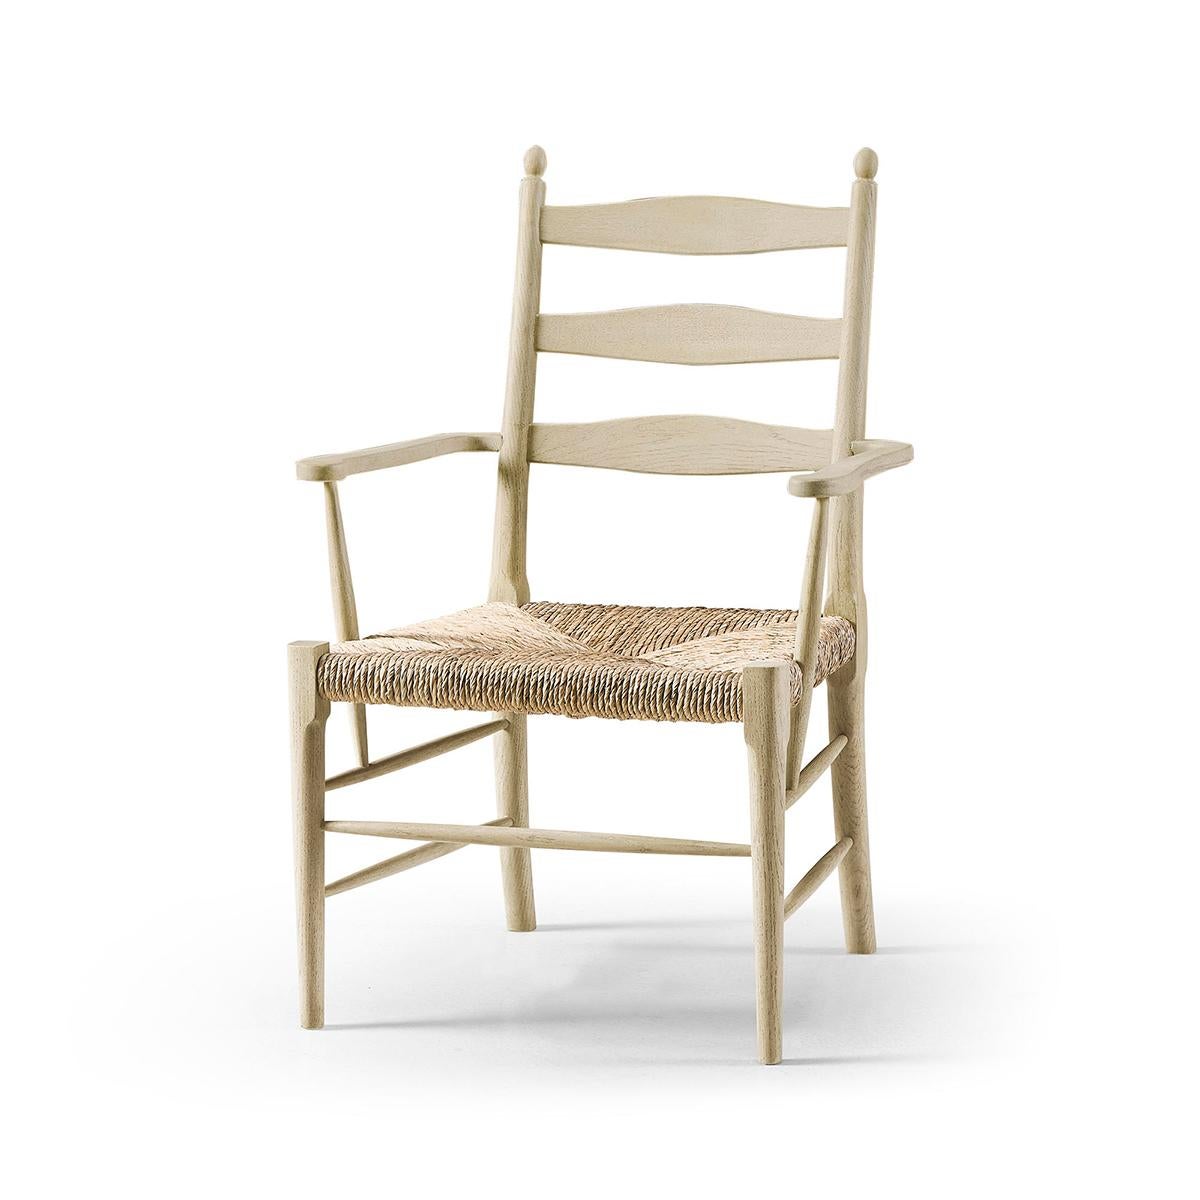 A masterpiece of comfort and rustic elegance. This chair boasts a robust stripped oak frame that reveals the exquisite natural grain and charm of the wood, evoking a sense of traditional beauty. Wrapped in creamy oatmeal performance fabric cushions,